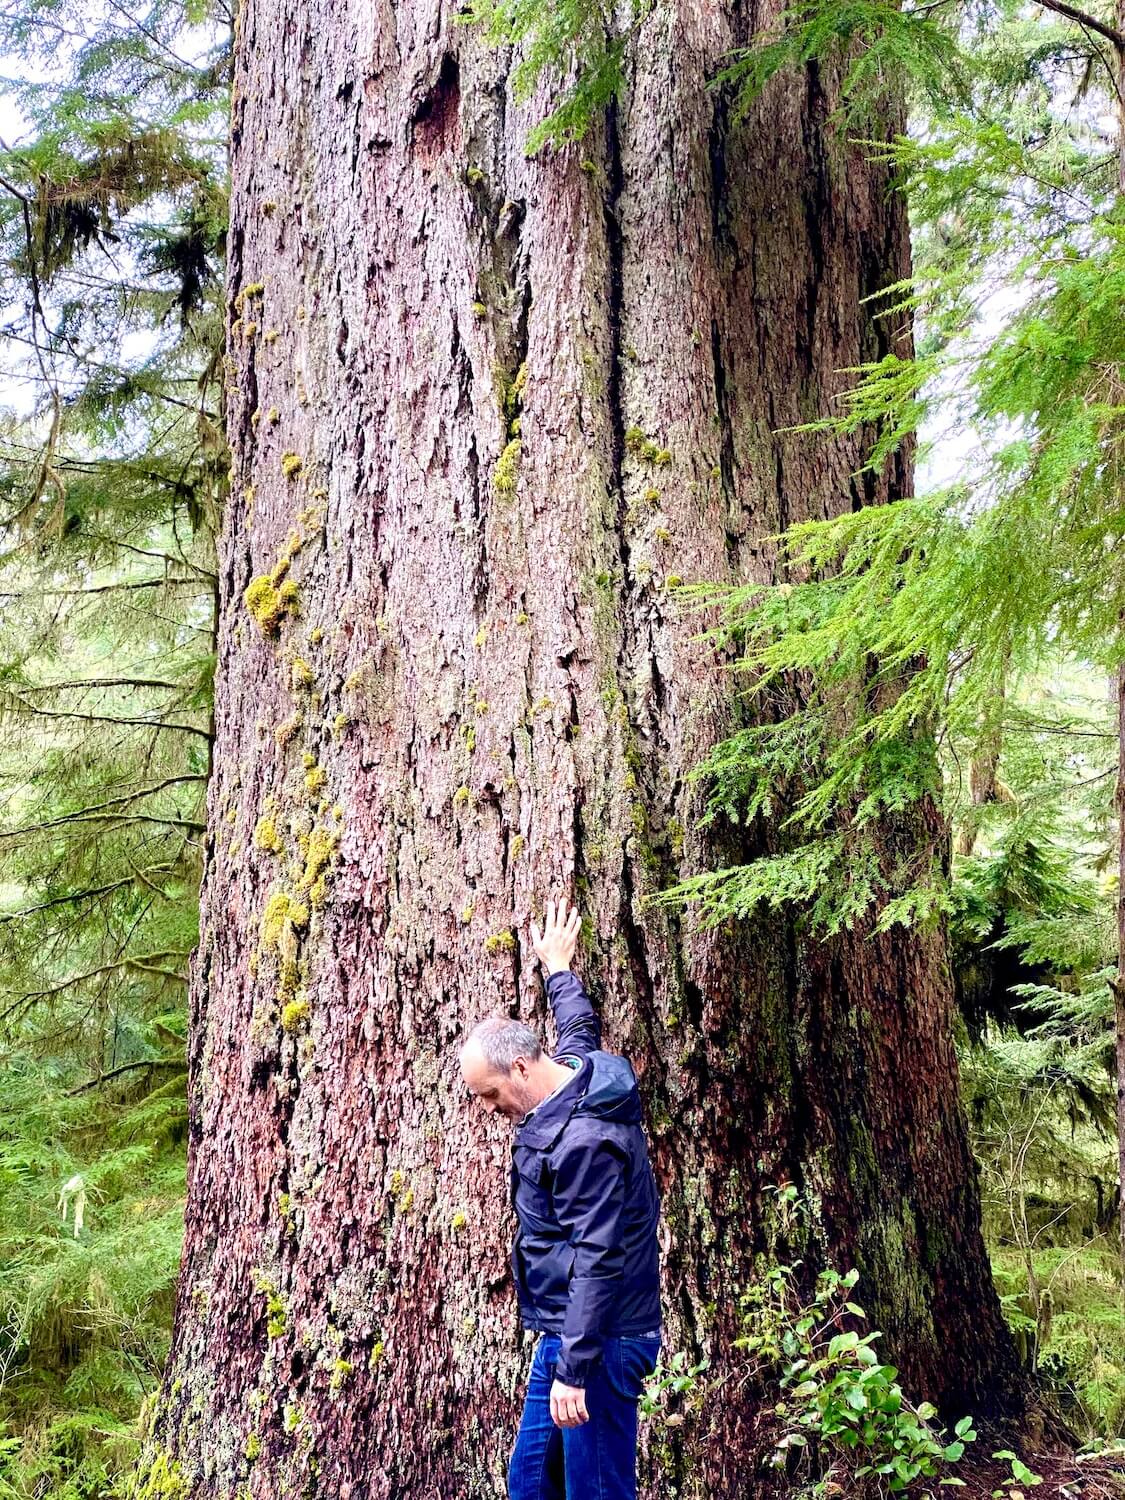 Matthew Kessi stands next to an old growth Douglas fir tree. He places his hand against the rough bark as if to check for a pulse and he looks down to the forest ground.